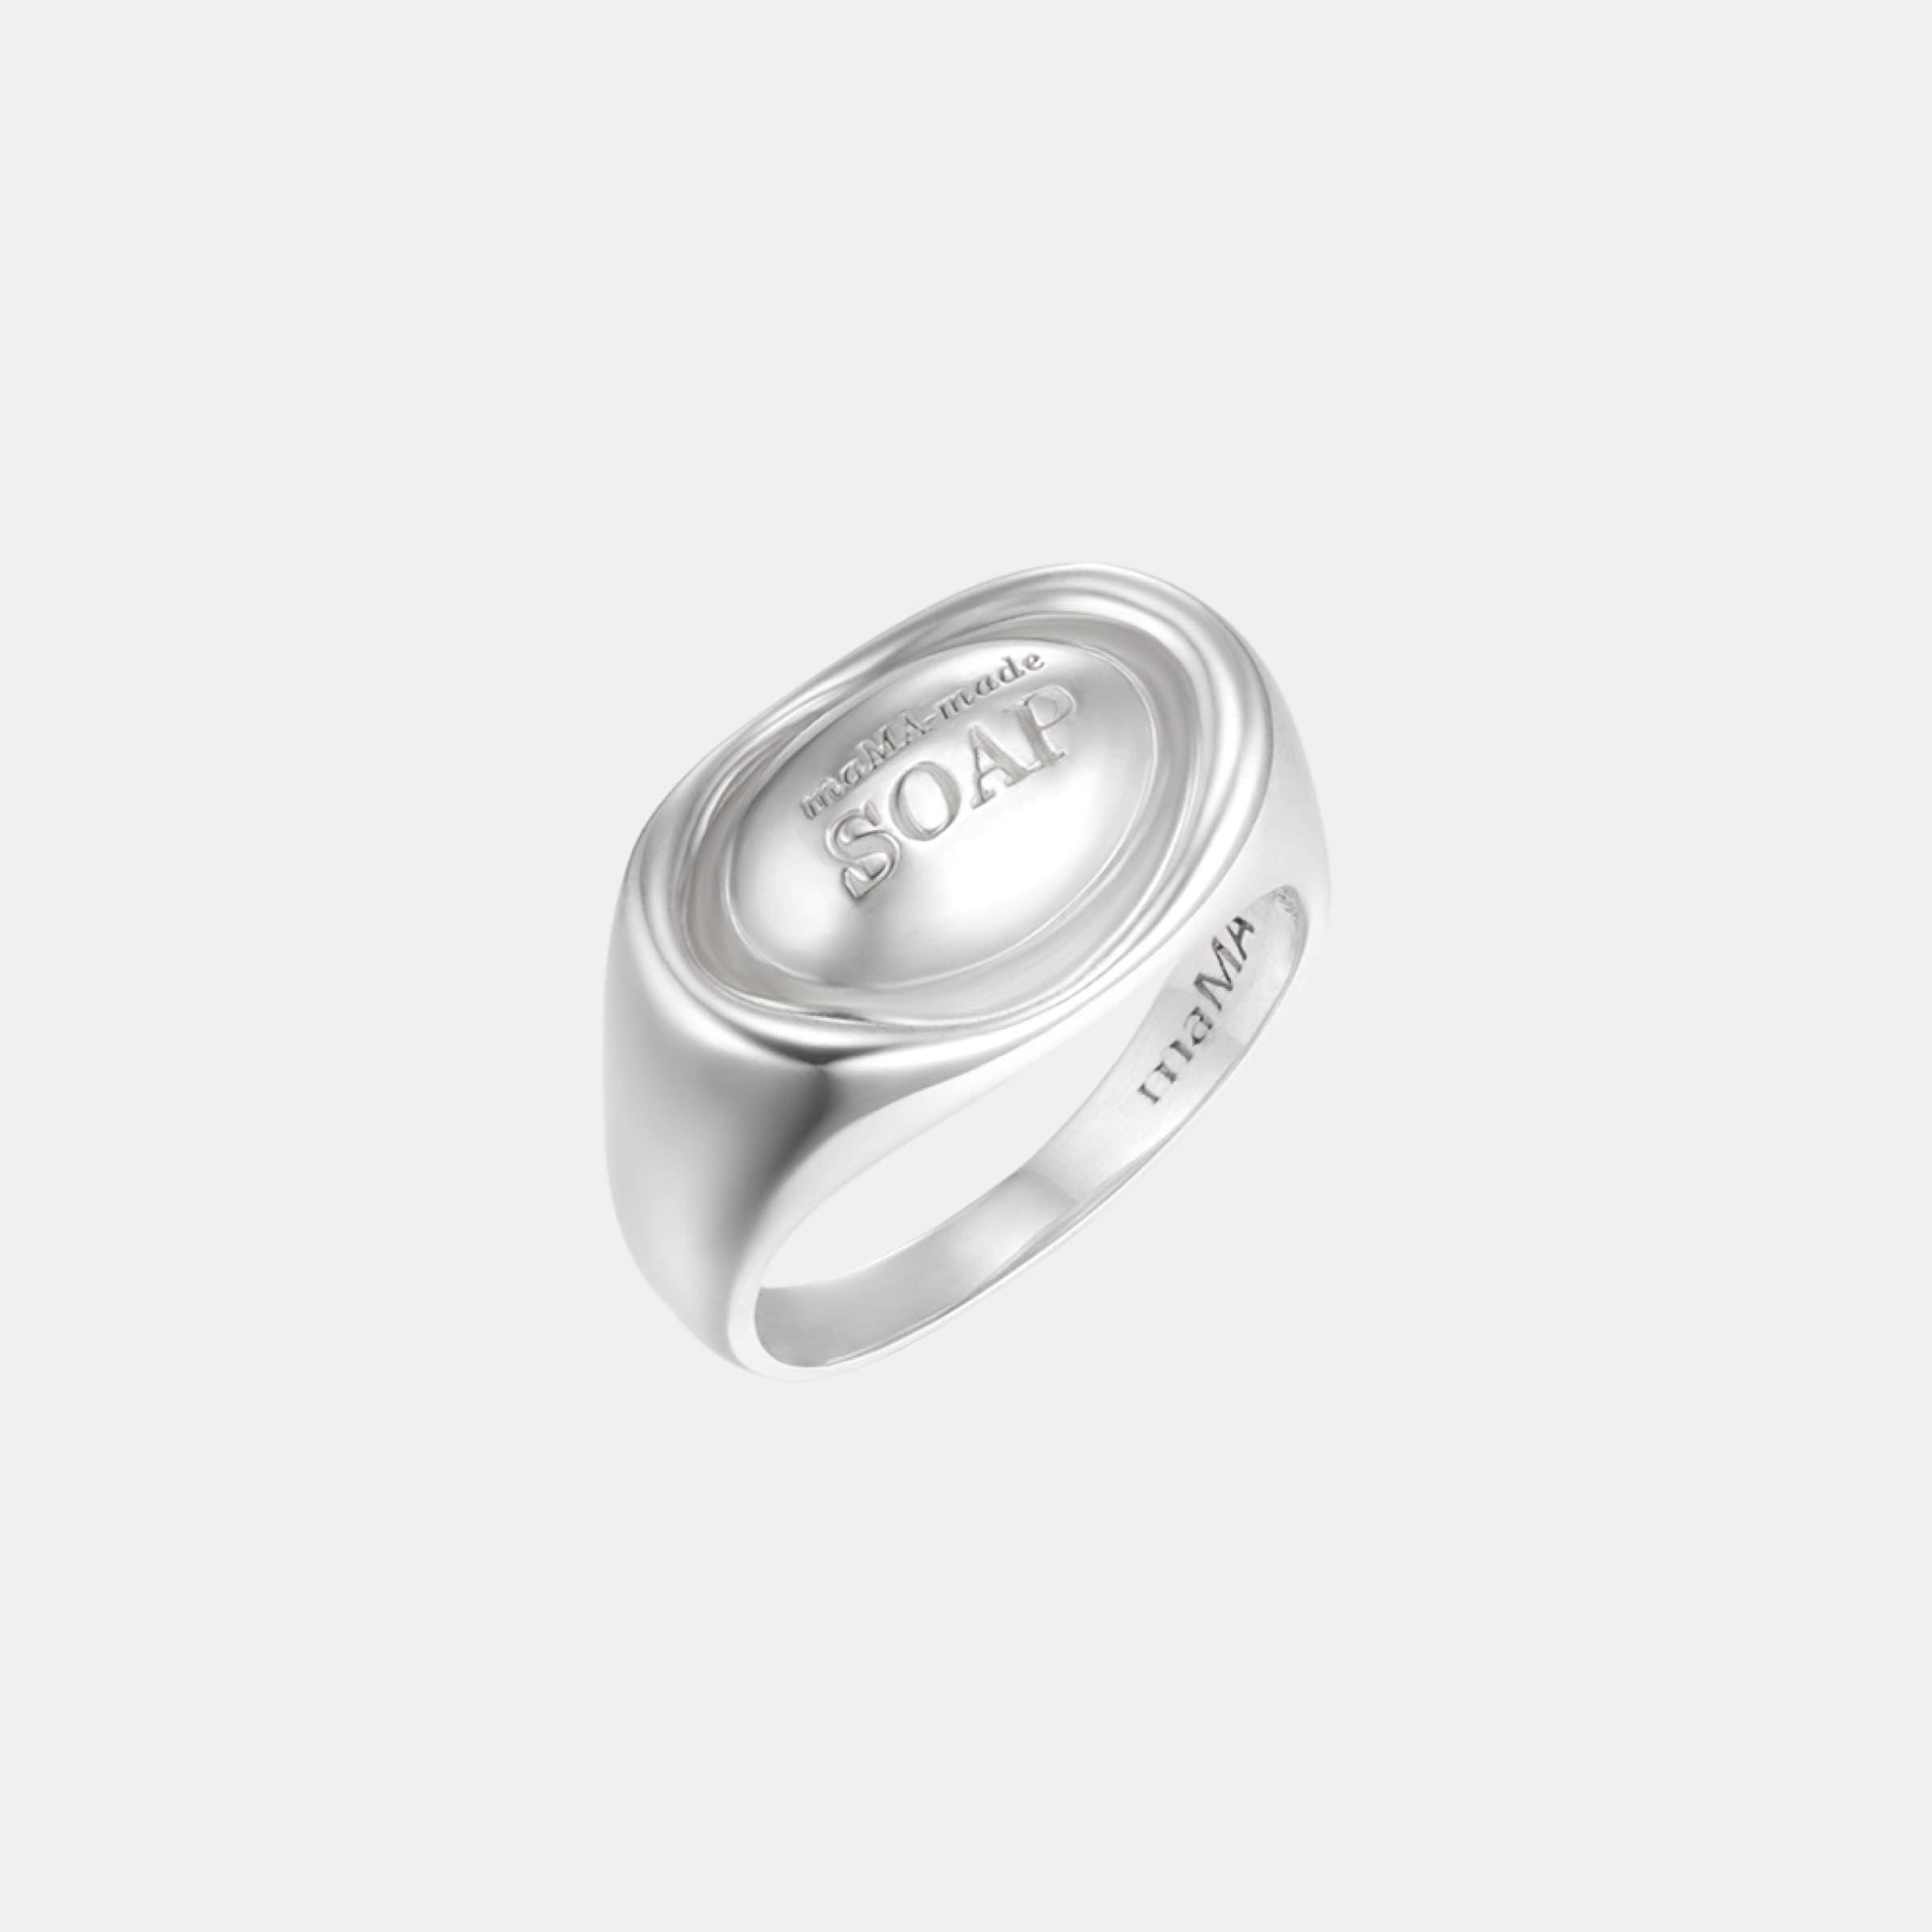 SOAPY ボリューム オーバル シルバー ピンキー リング / SOAPY VOLUME OVAL SILVER RING